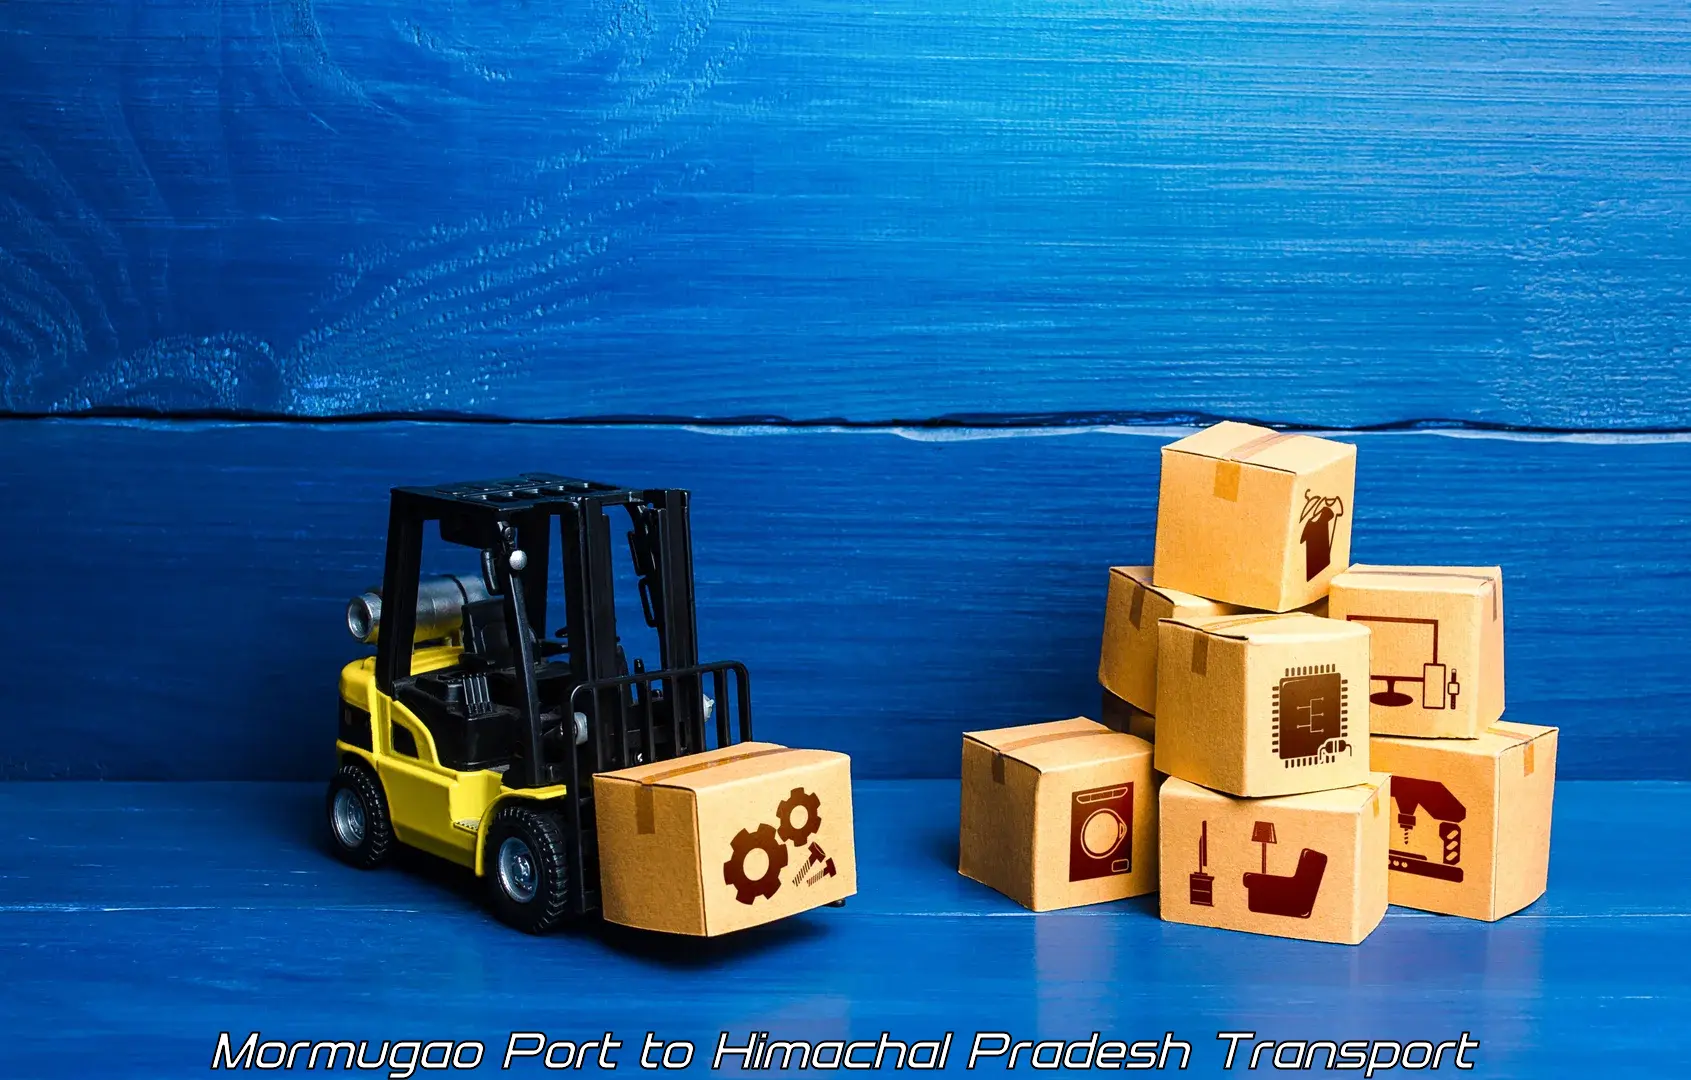 Container transport service in Mormugao Port to Himachal Pradesh